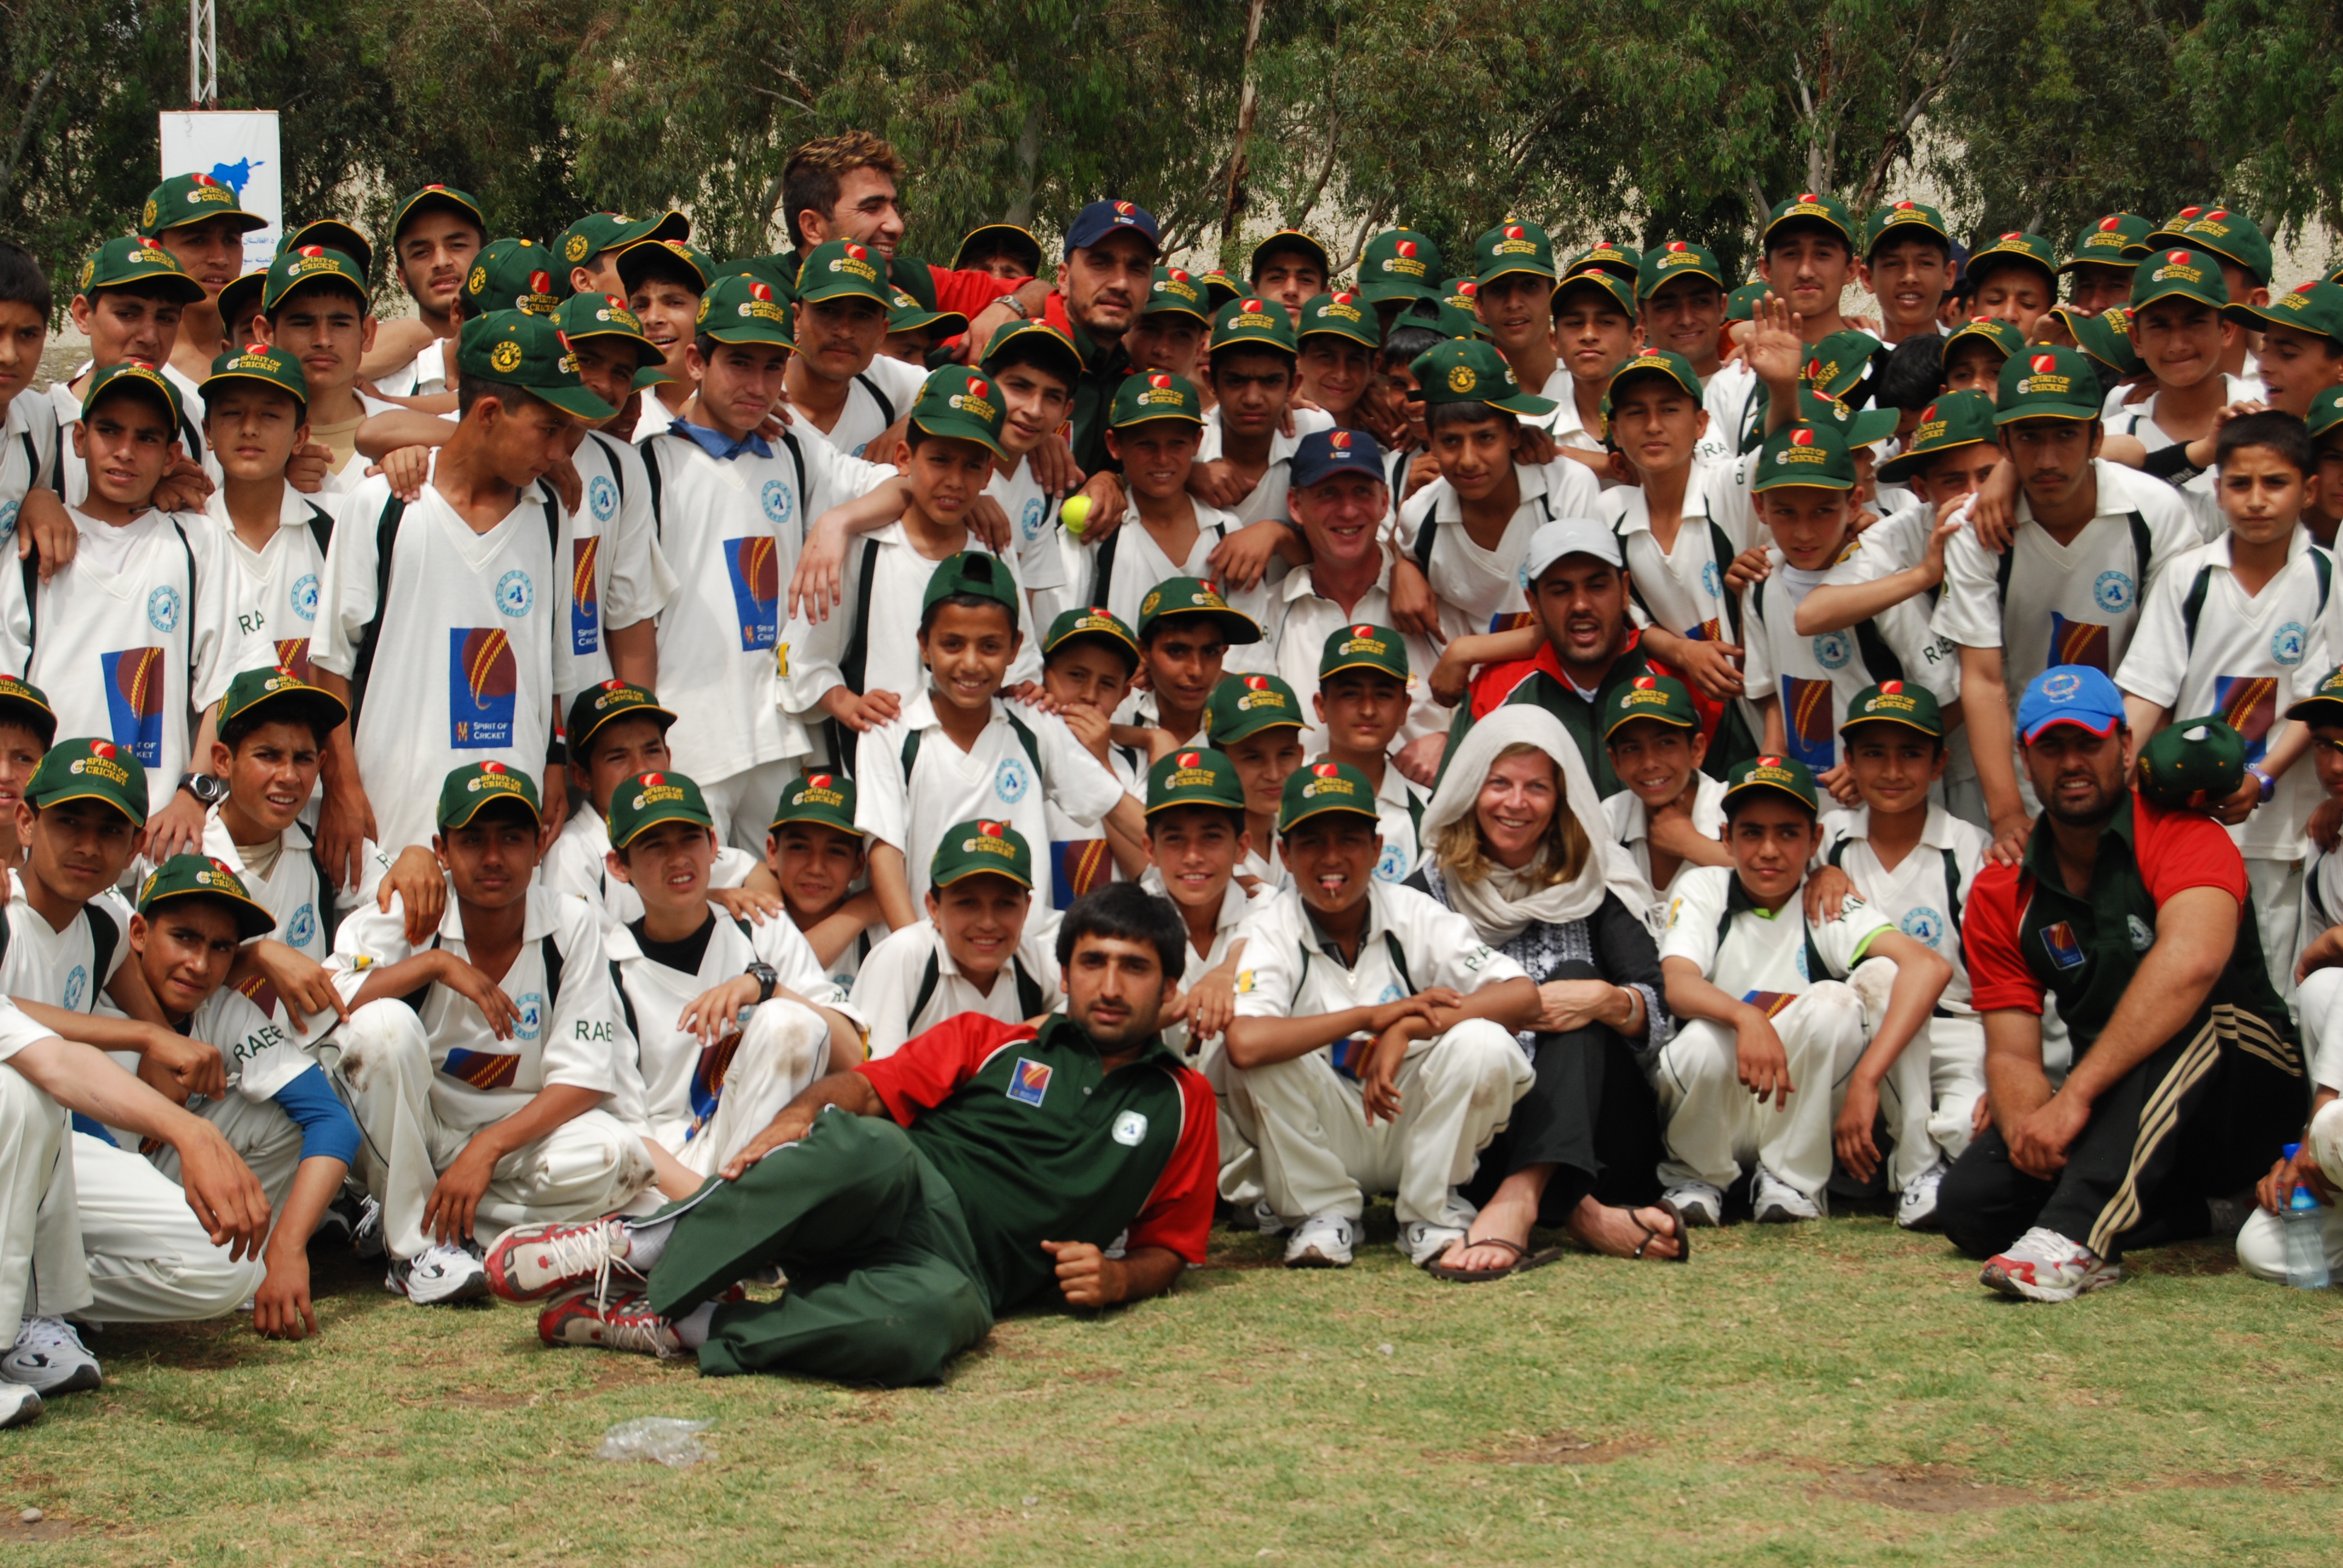 Sarah Fane with cricketers in Afghanistan 